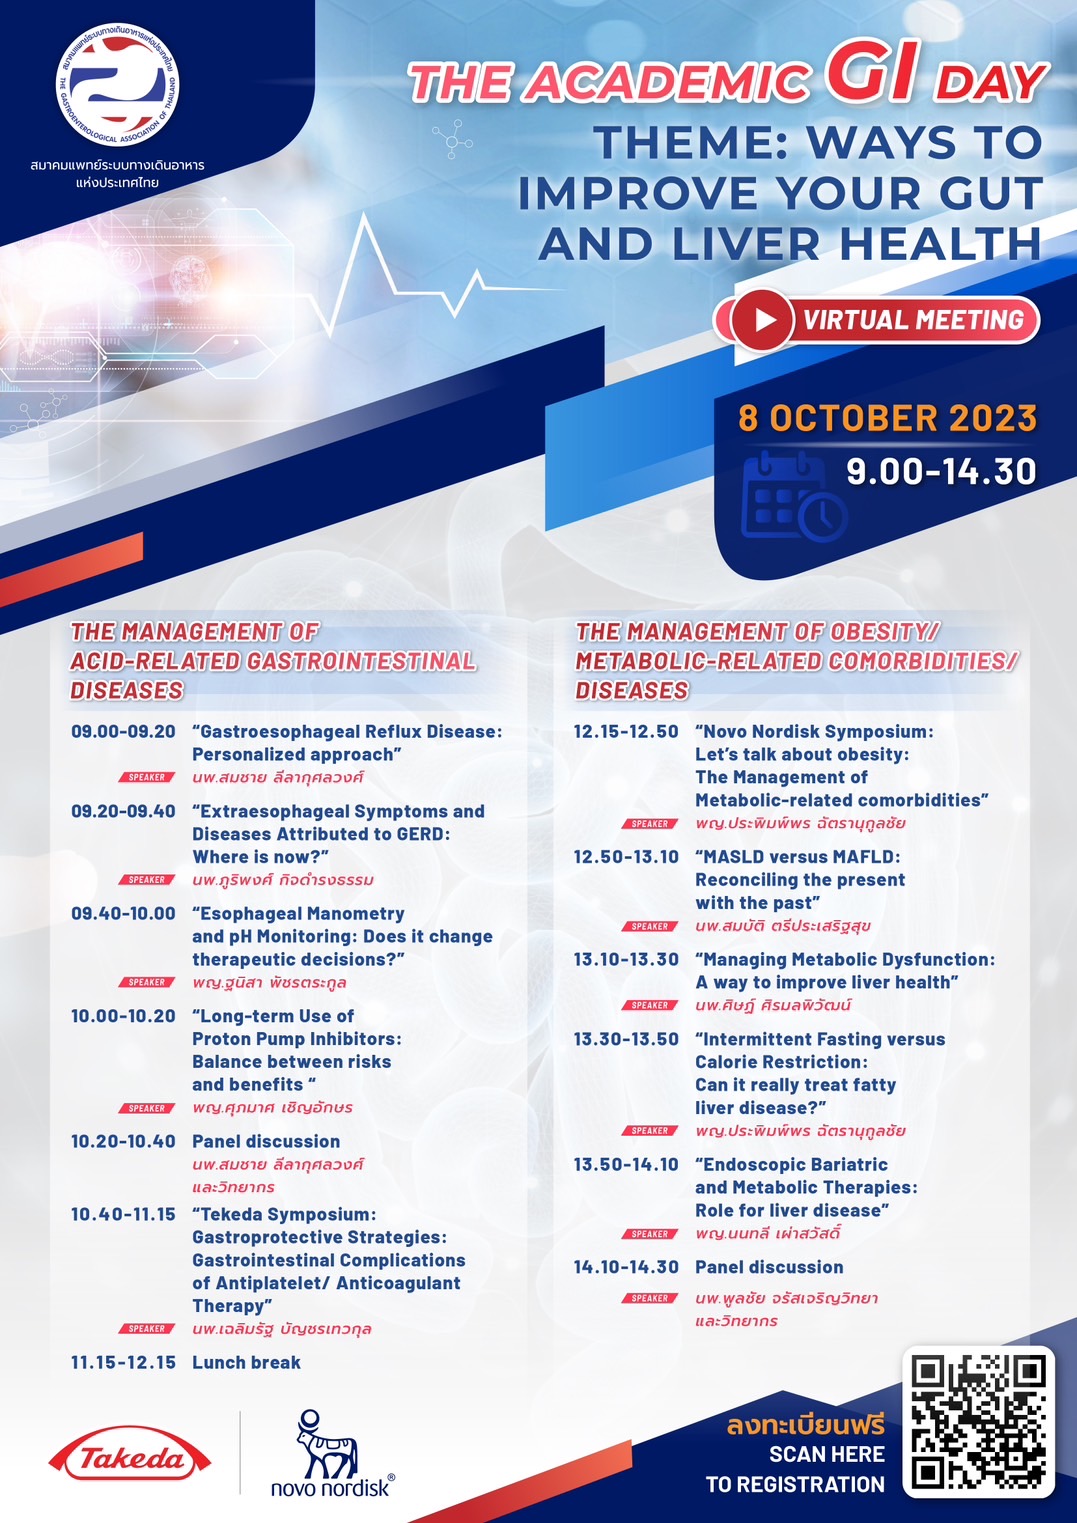 The Academic GI Day Theme: Ways to Improve Your Gut and Liver Health Virtual Meeting (8 October 2023)